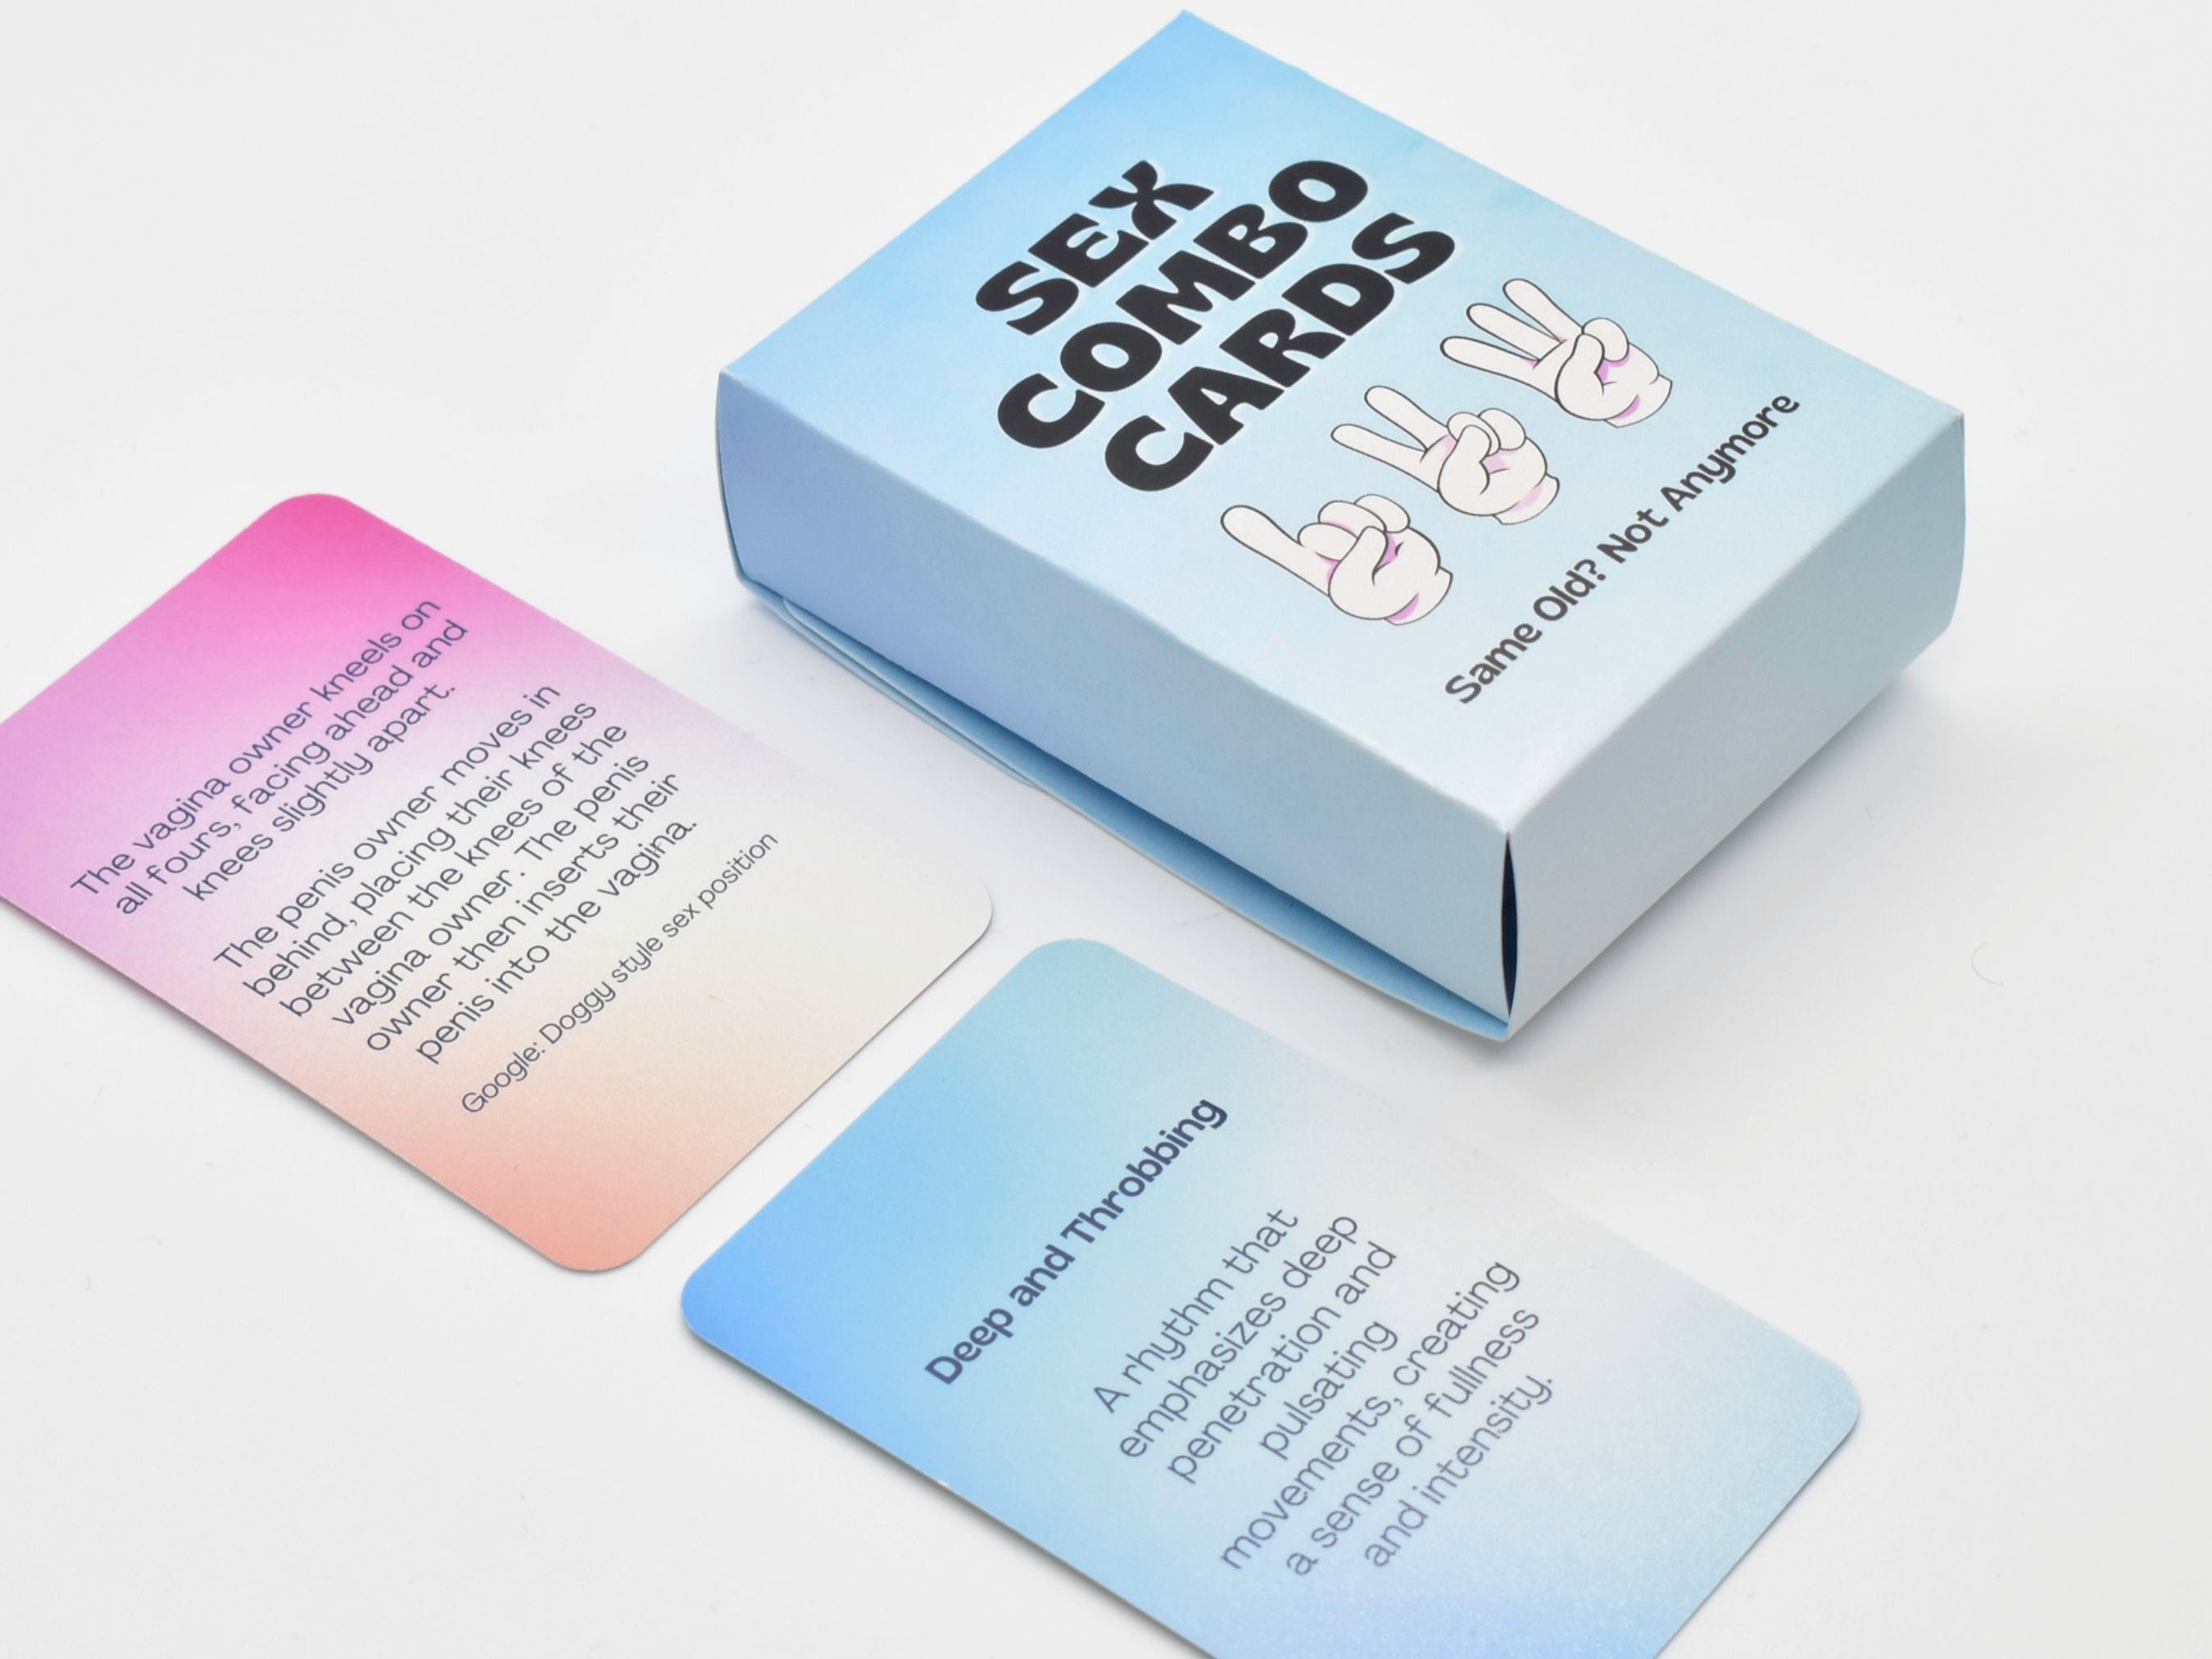 Sex Combo Cards